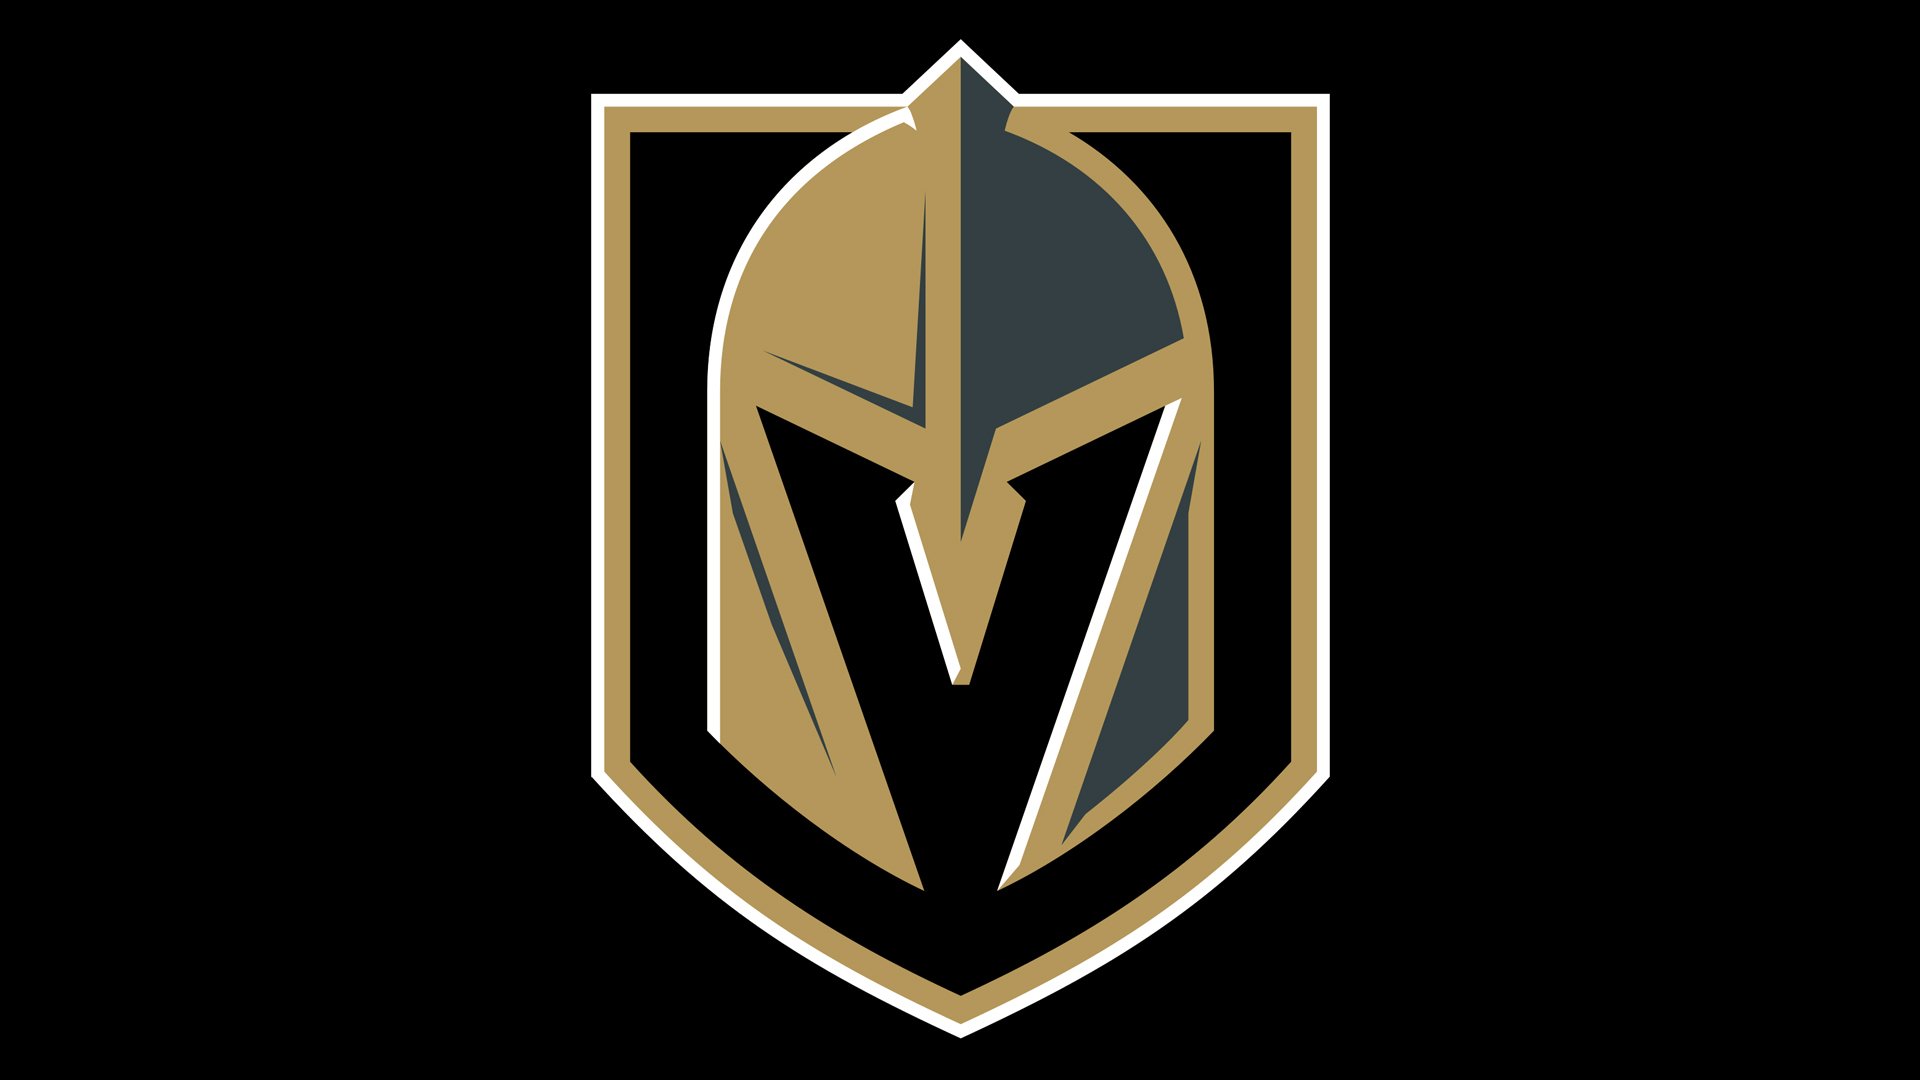 Vegas Golden Knights logo and symbol, meaning, history, PNG